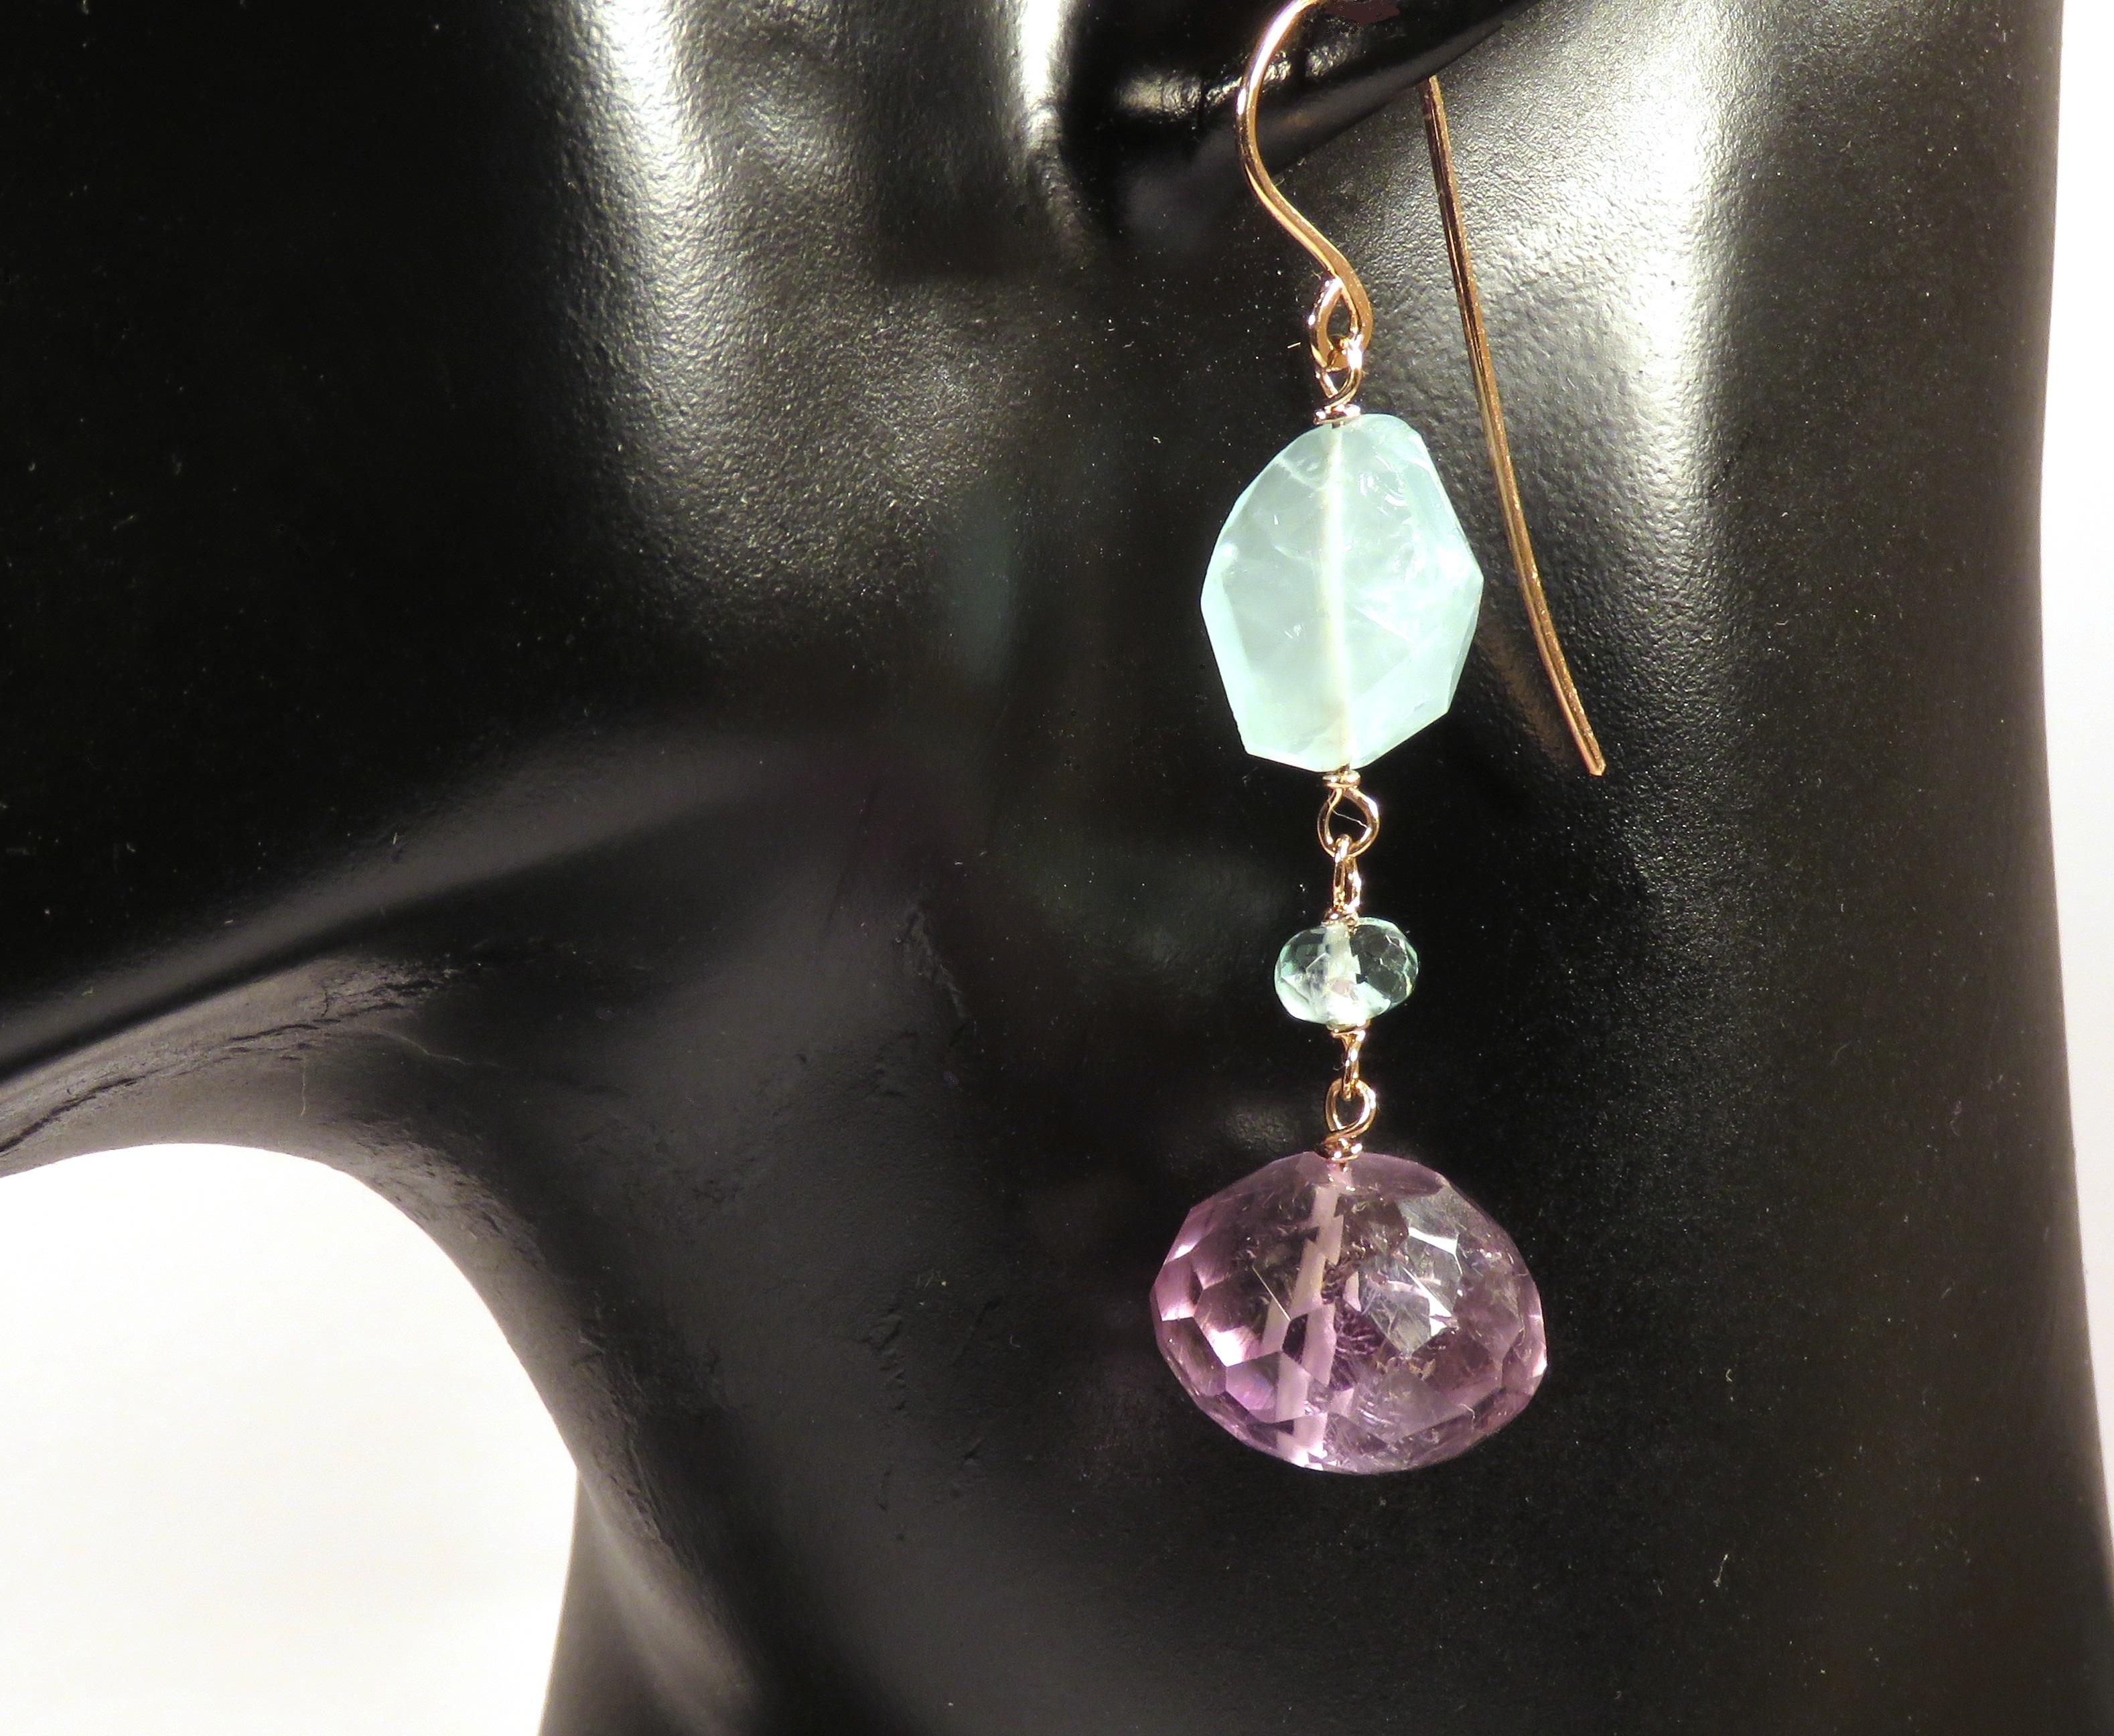 Wonderful dangle earrings in 9 karat rose gold with real aquamarine and amethyst gemstones. The length of each earring is 55 mm / 2.165 inches. Each item is stamped with the Italian gold mark 375 and Botta Gioielli brandmark